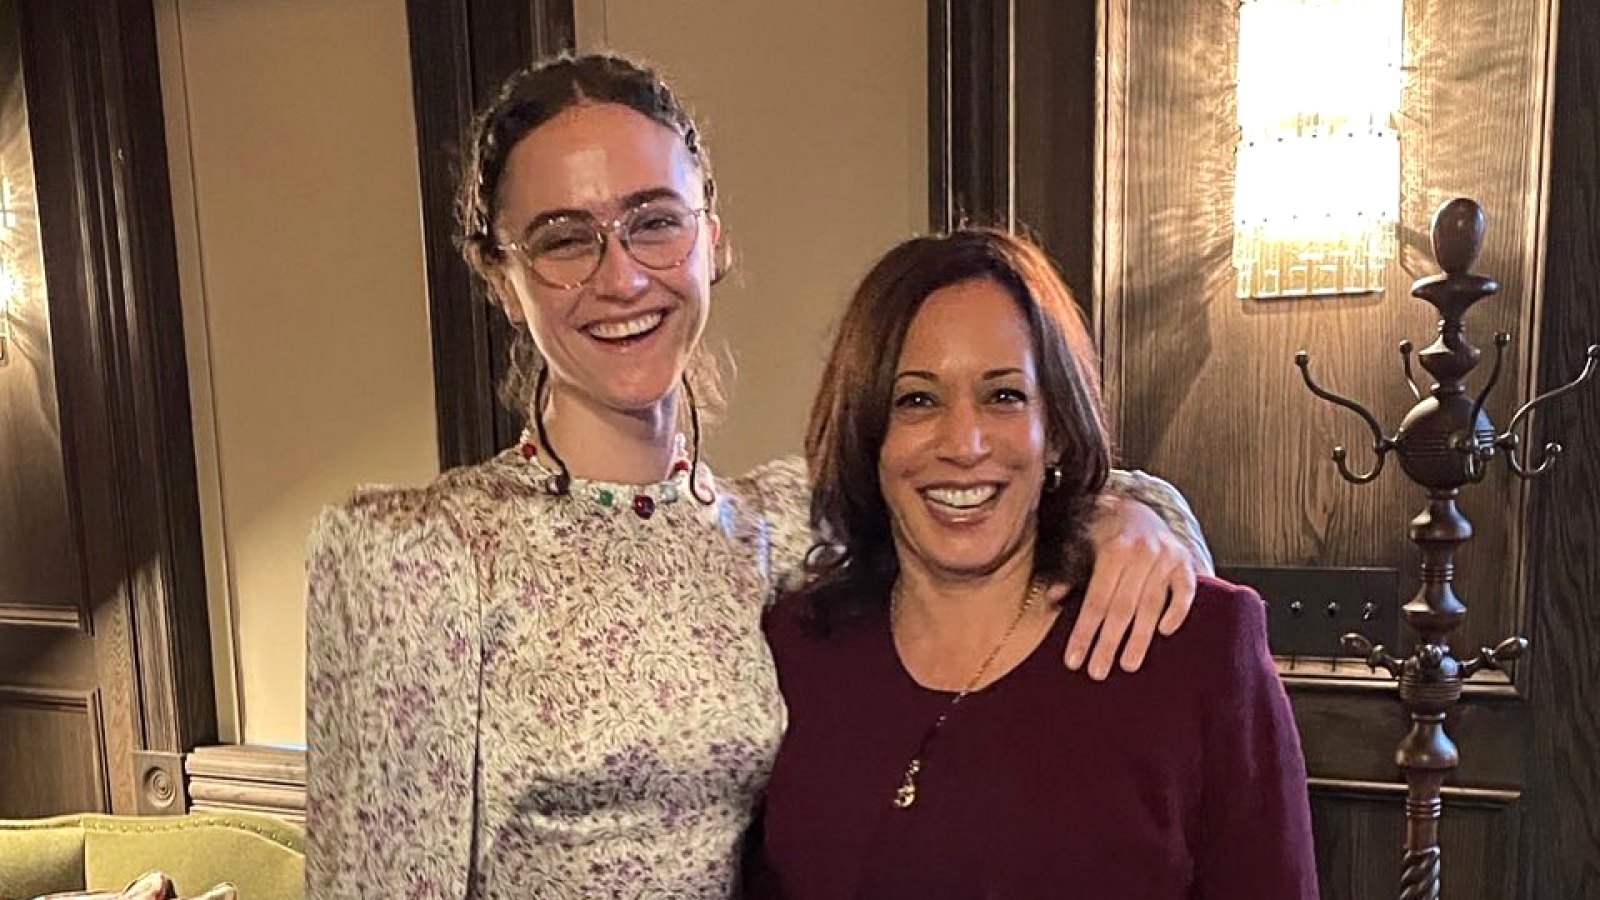 Kamala Harris Tells Stepdaughter Ella Emhoff to ‘Keep Dreaming’ While Celebrating Her College Graduation